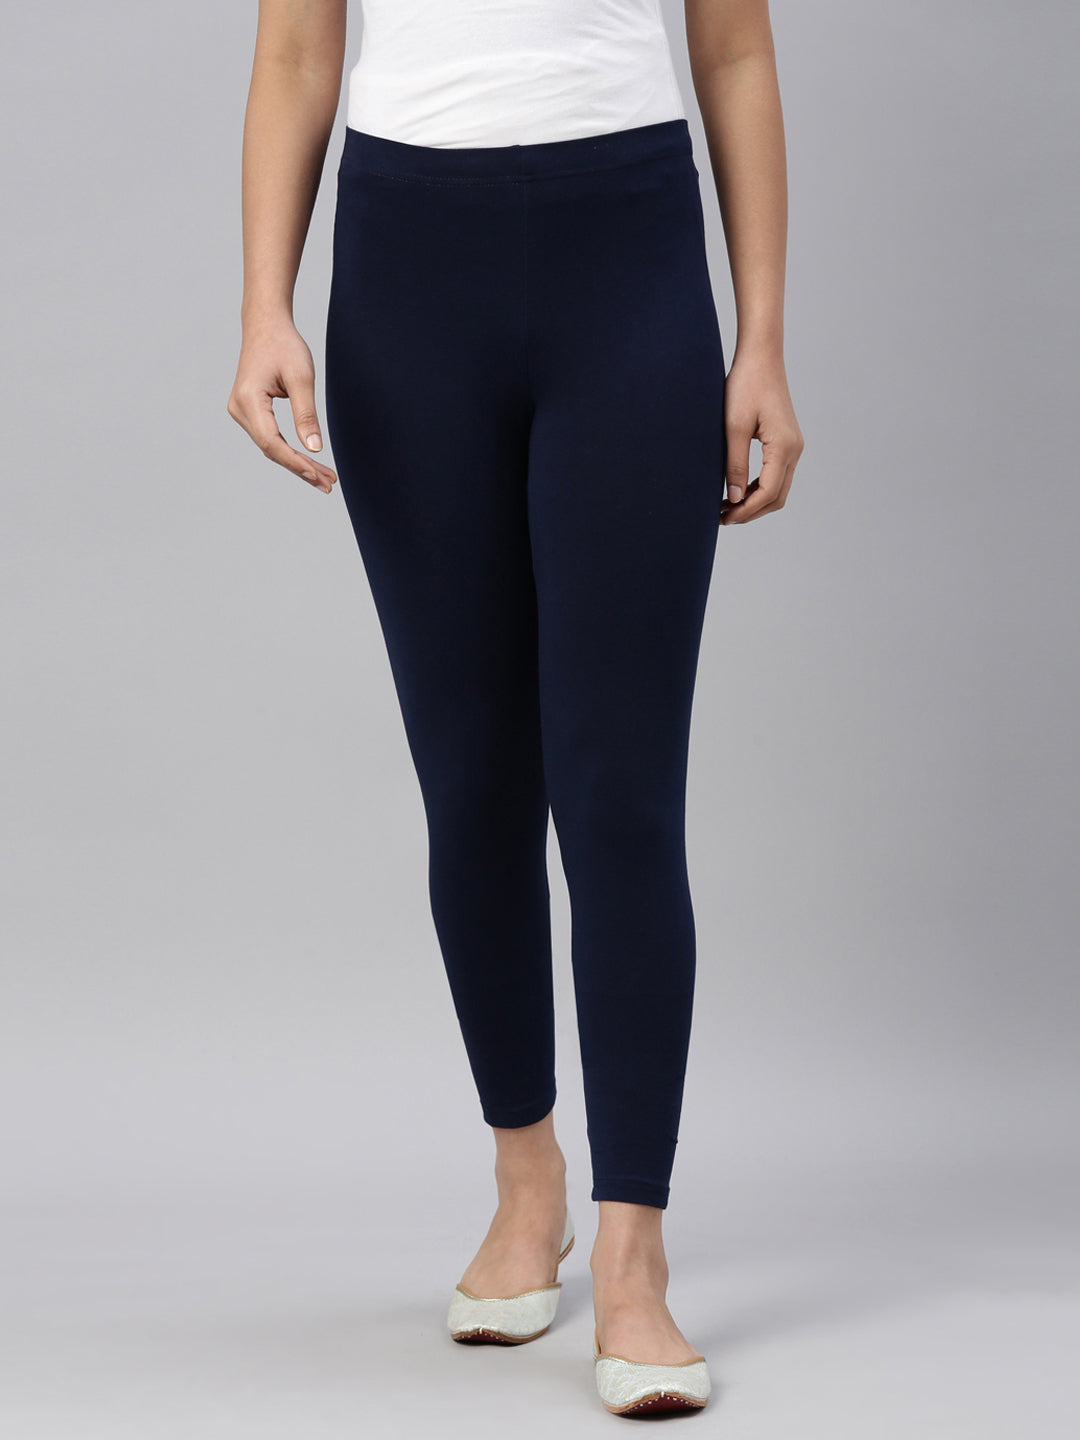 Top Go Colors Legging Retailers in Ongole - Best Go Colors Legging  Retailers - Justdial